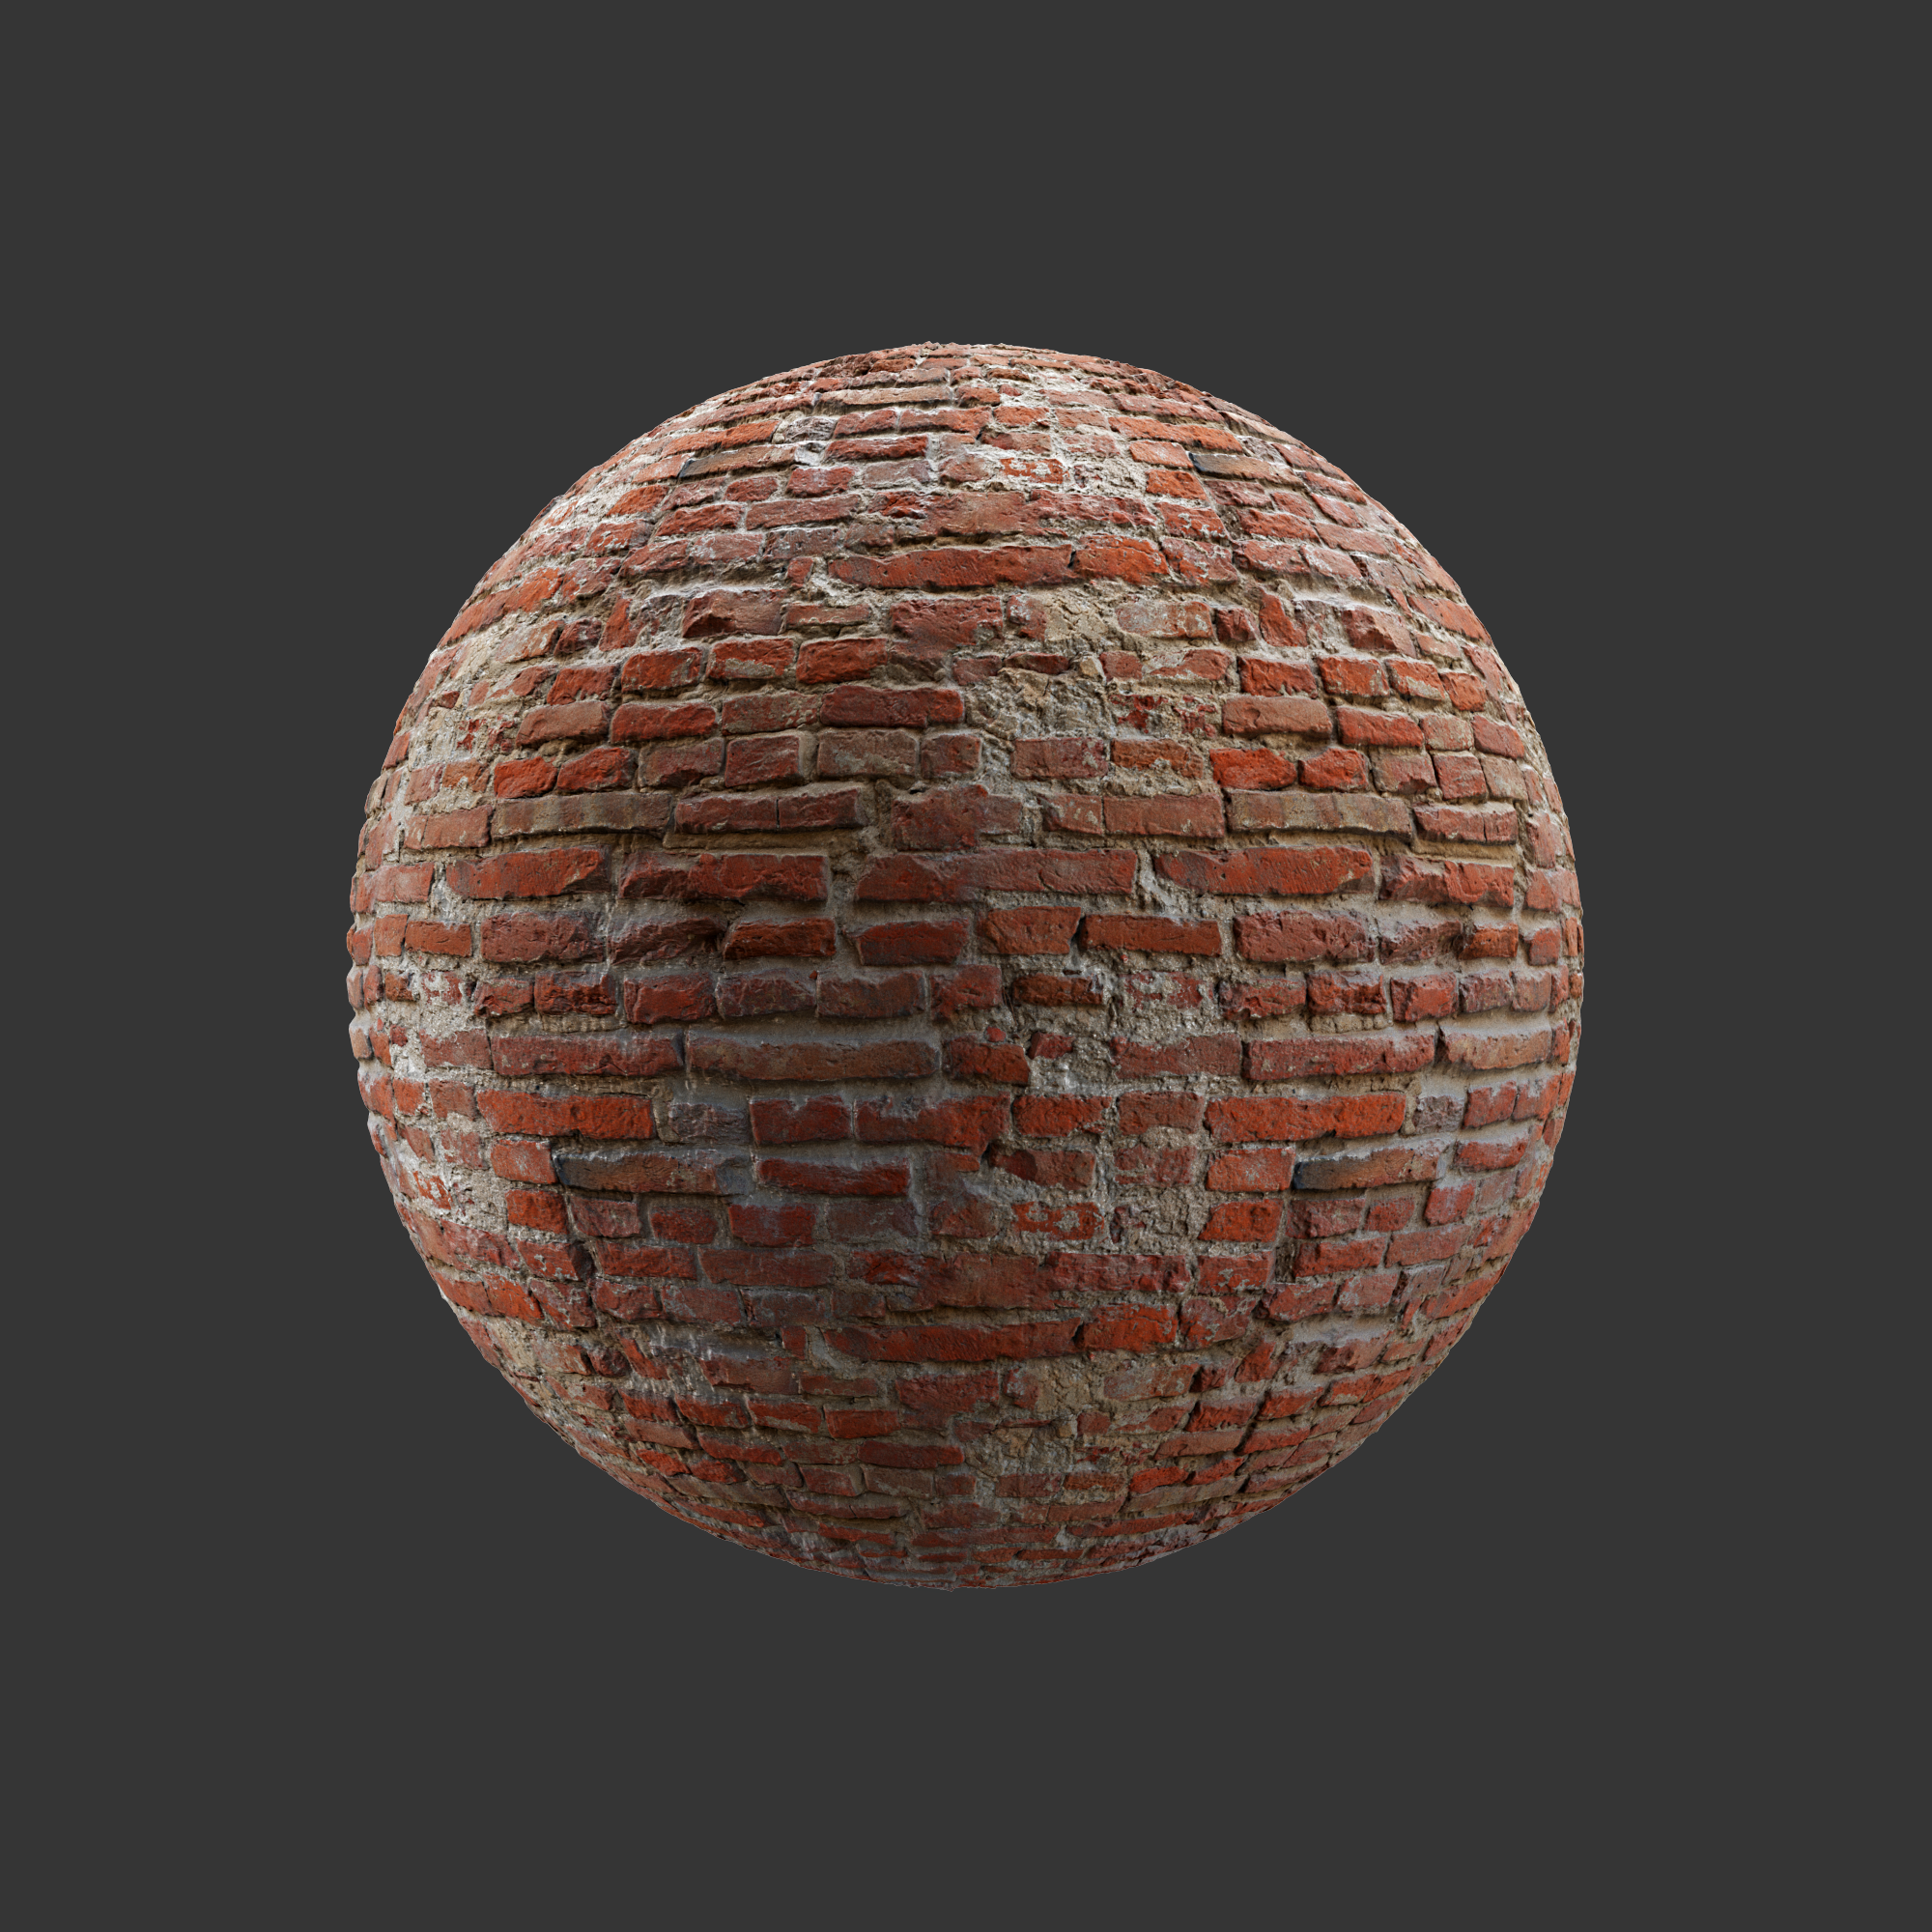 Final tileable material created with ArtEngine